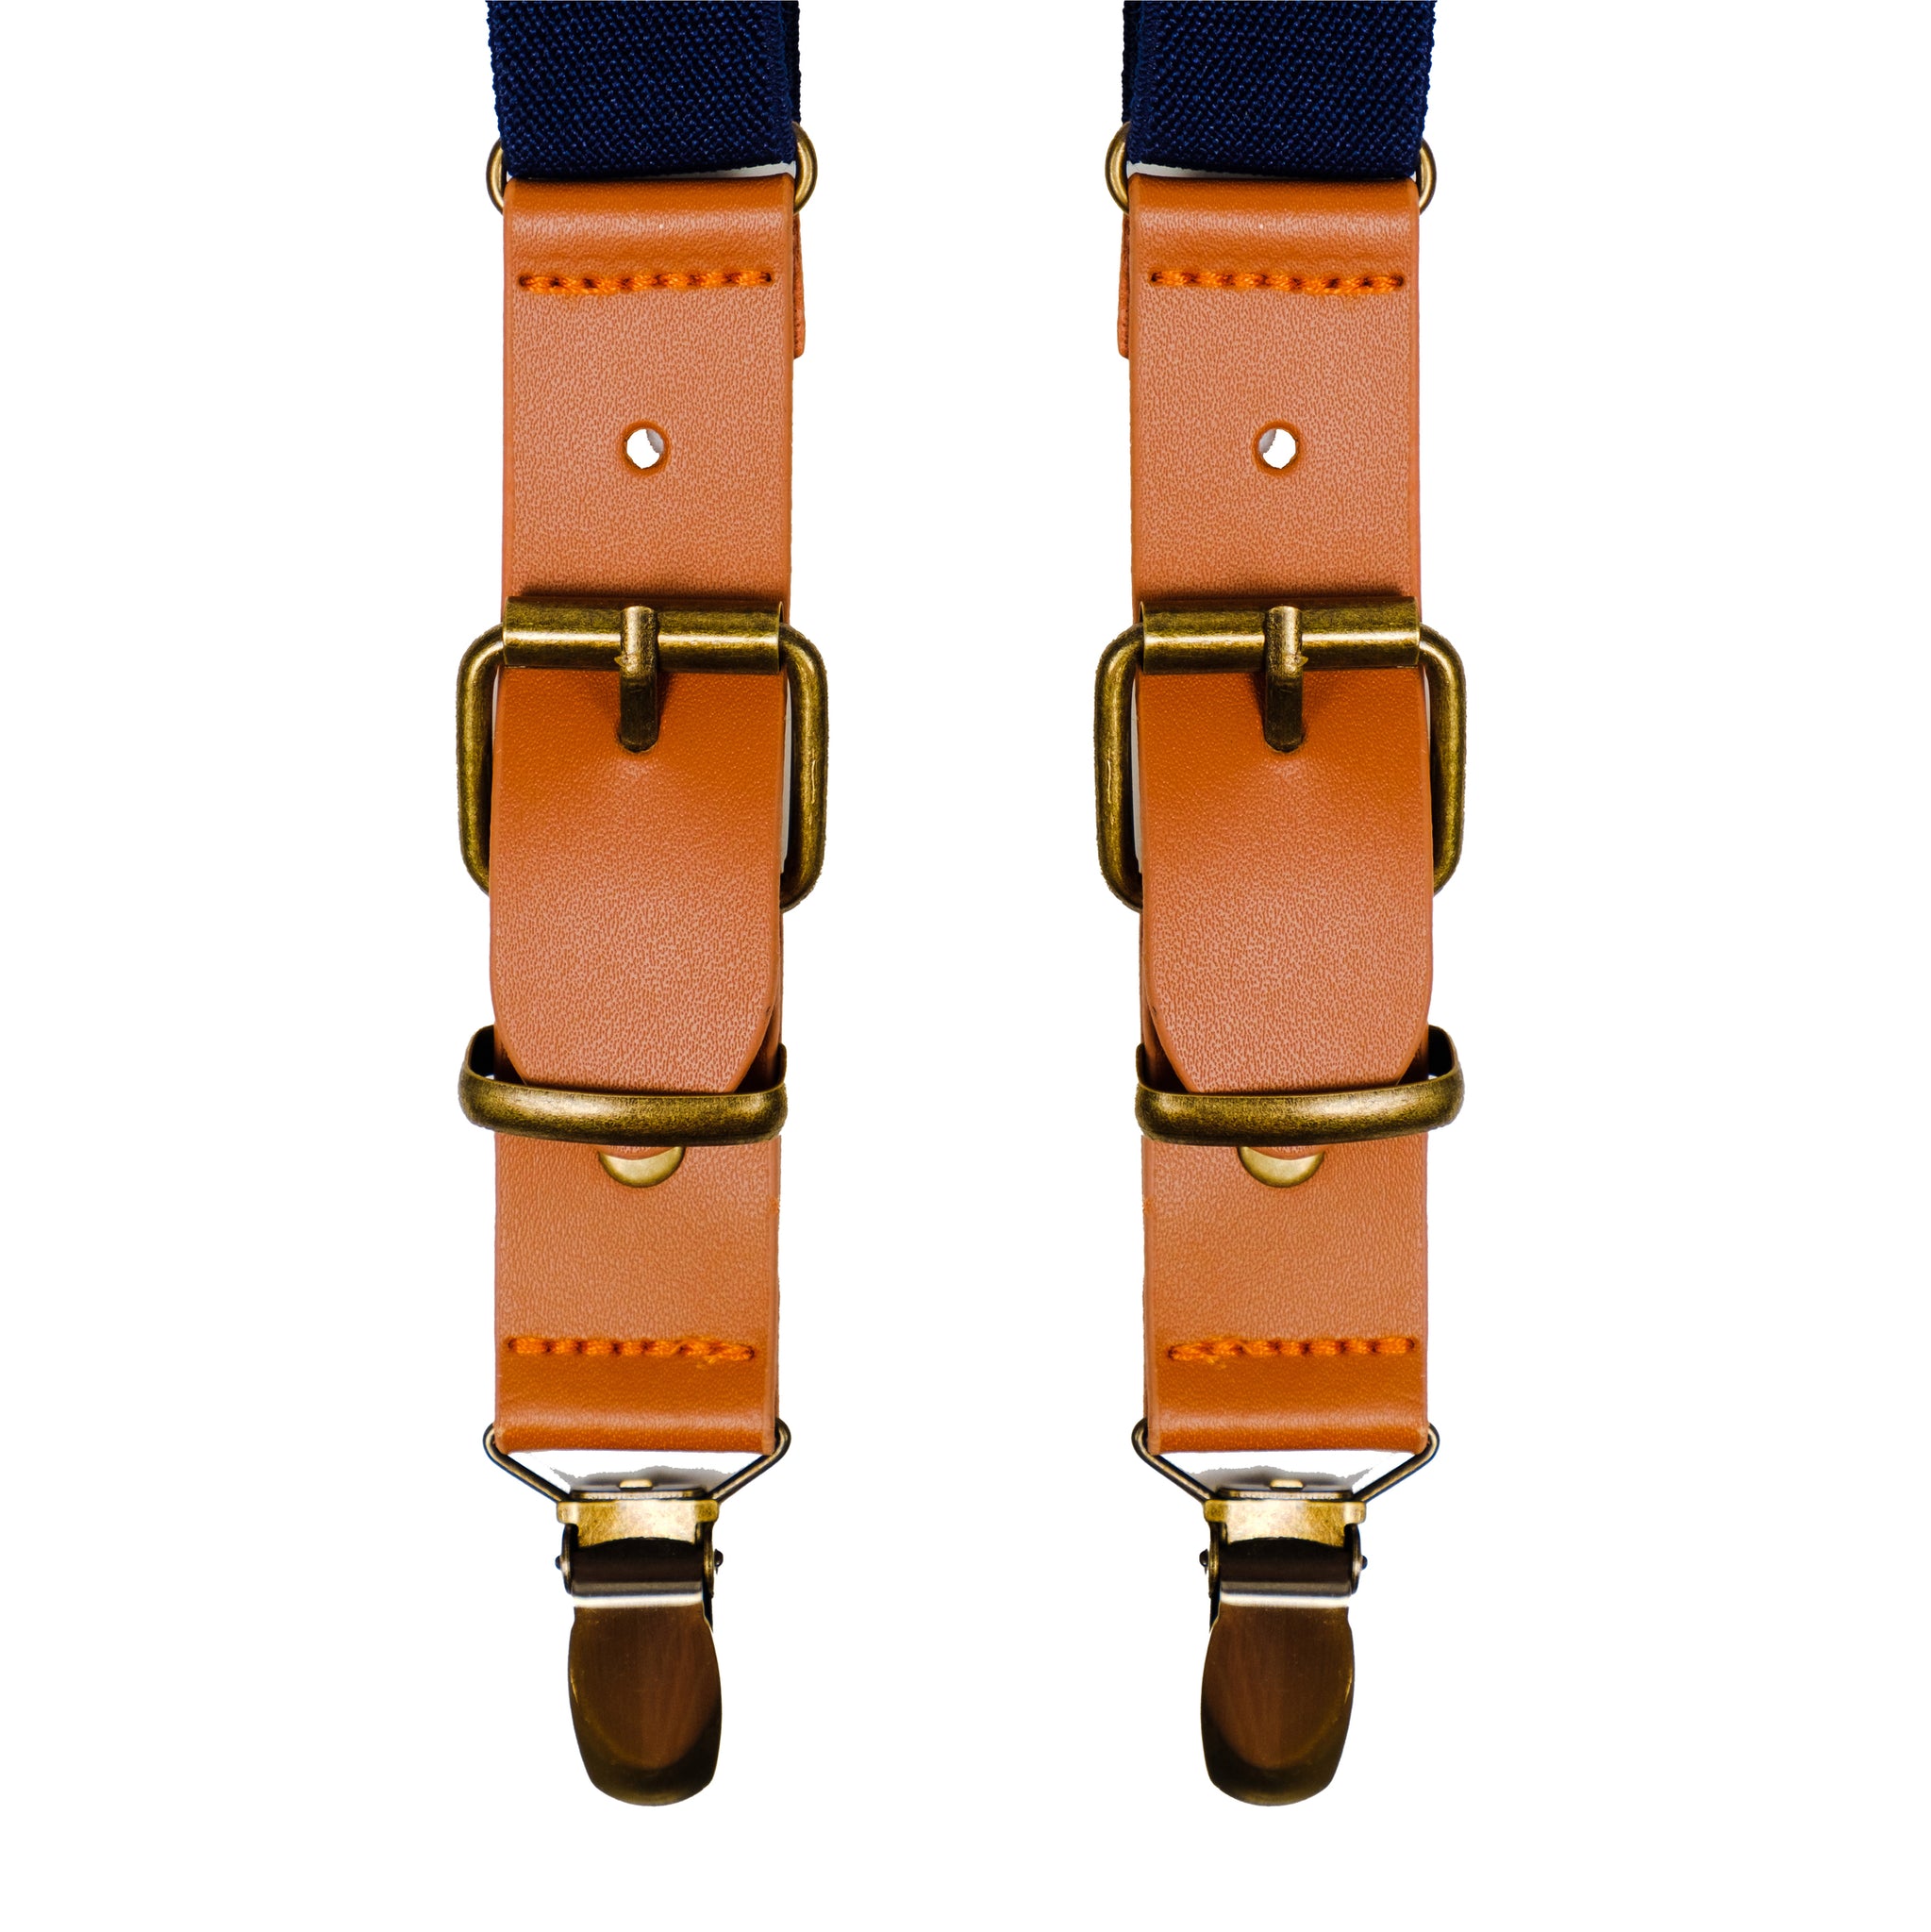 Chokore Y-shaped Suspenders with Leather detailing and adjustable Elastic Strap (Navy Blue)